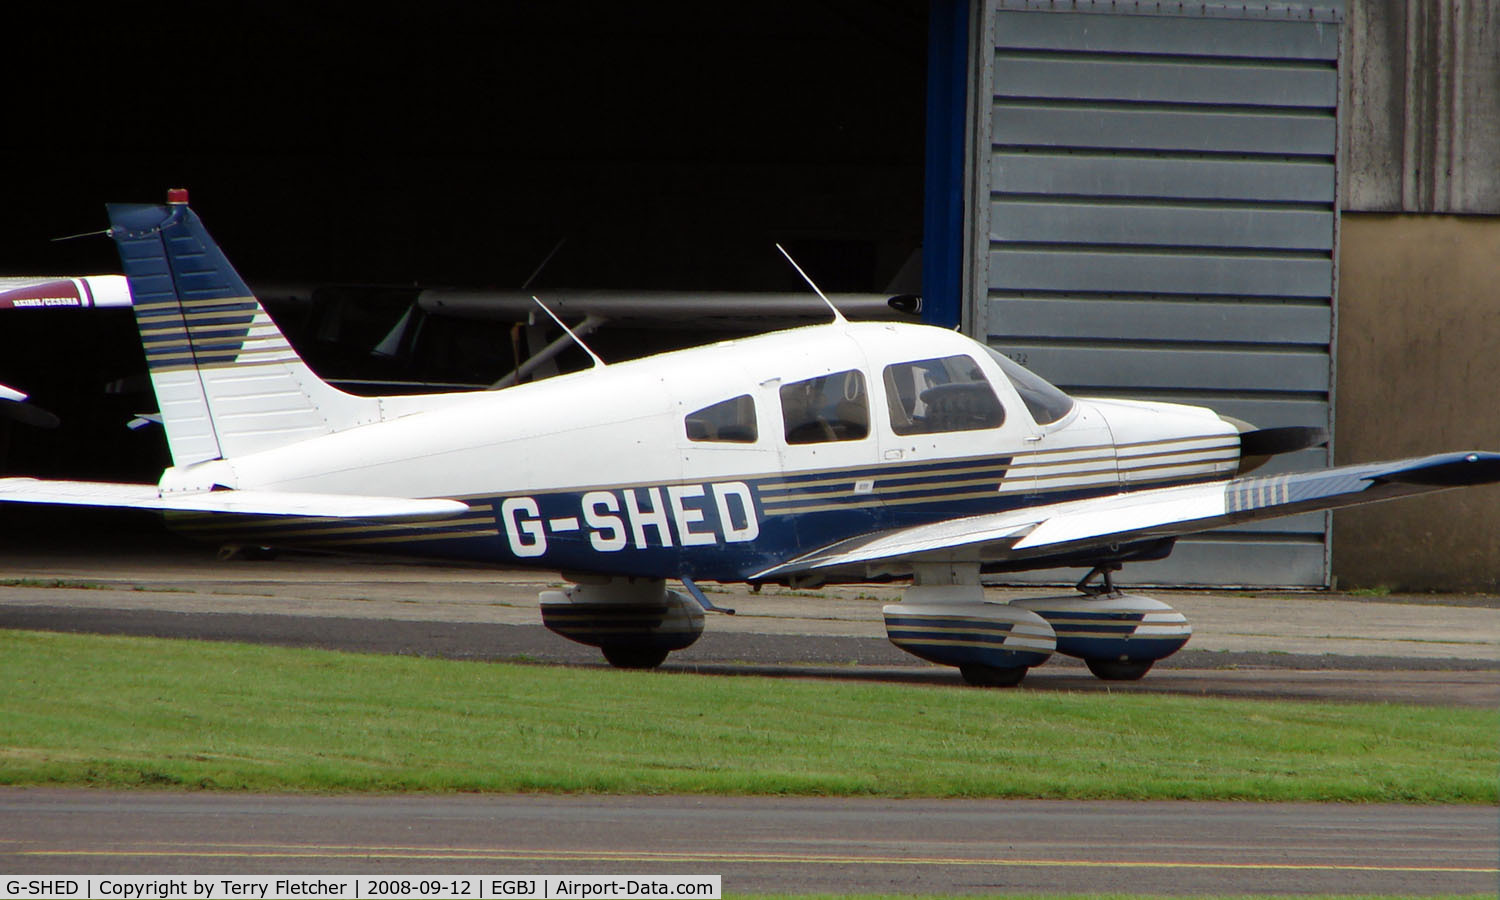 G-SHED, 1978 Piper PA-28-181 Cherokee Archer II C/N 28-7890068, Piper Pa-28-181 noted at Gloucestershire Airport  UK in Sept 2008